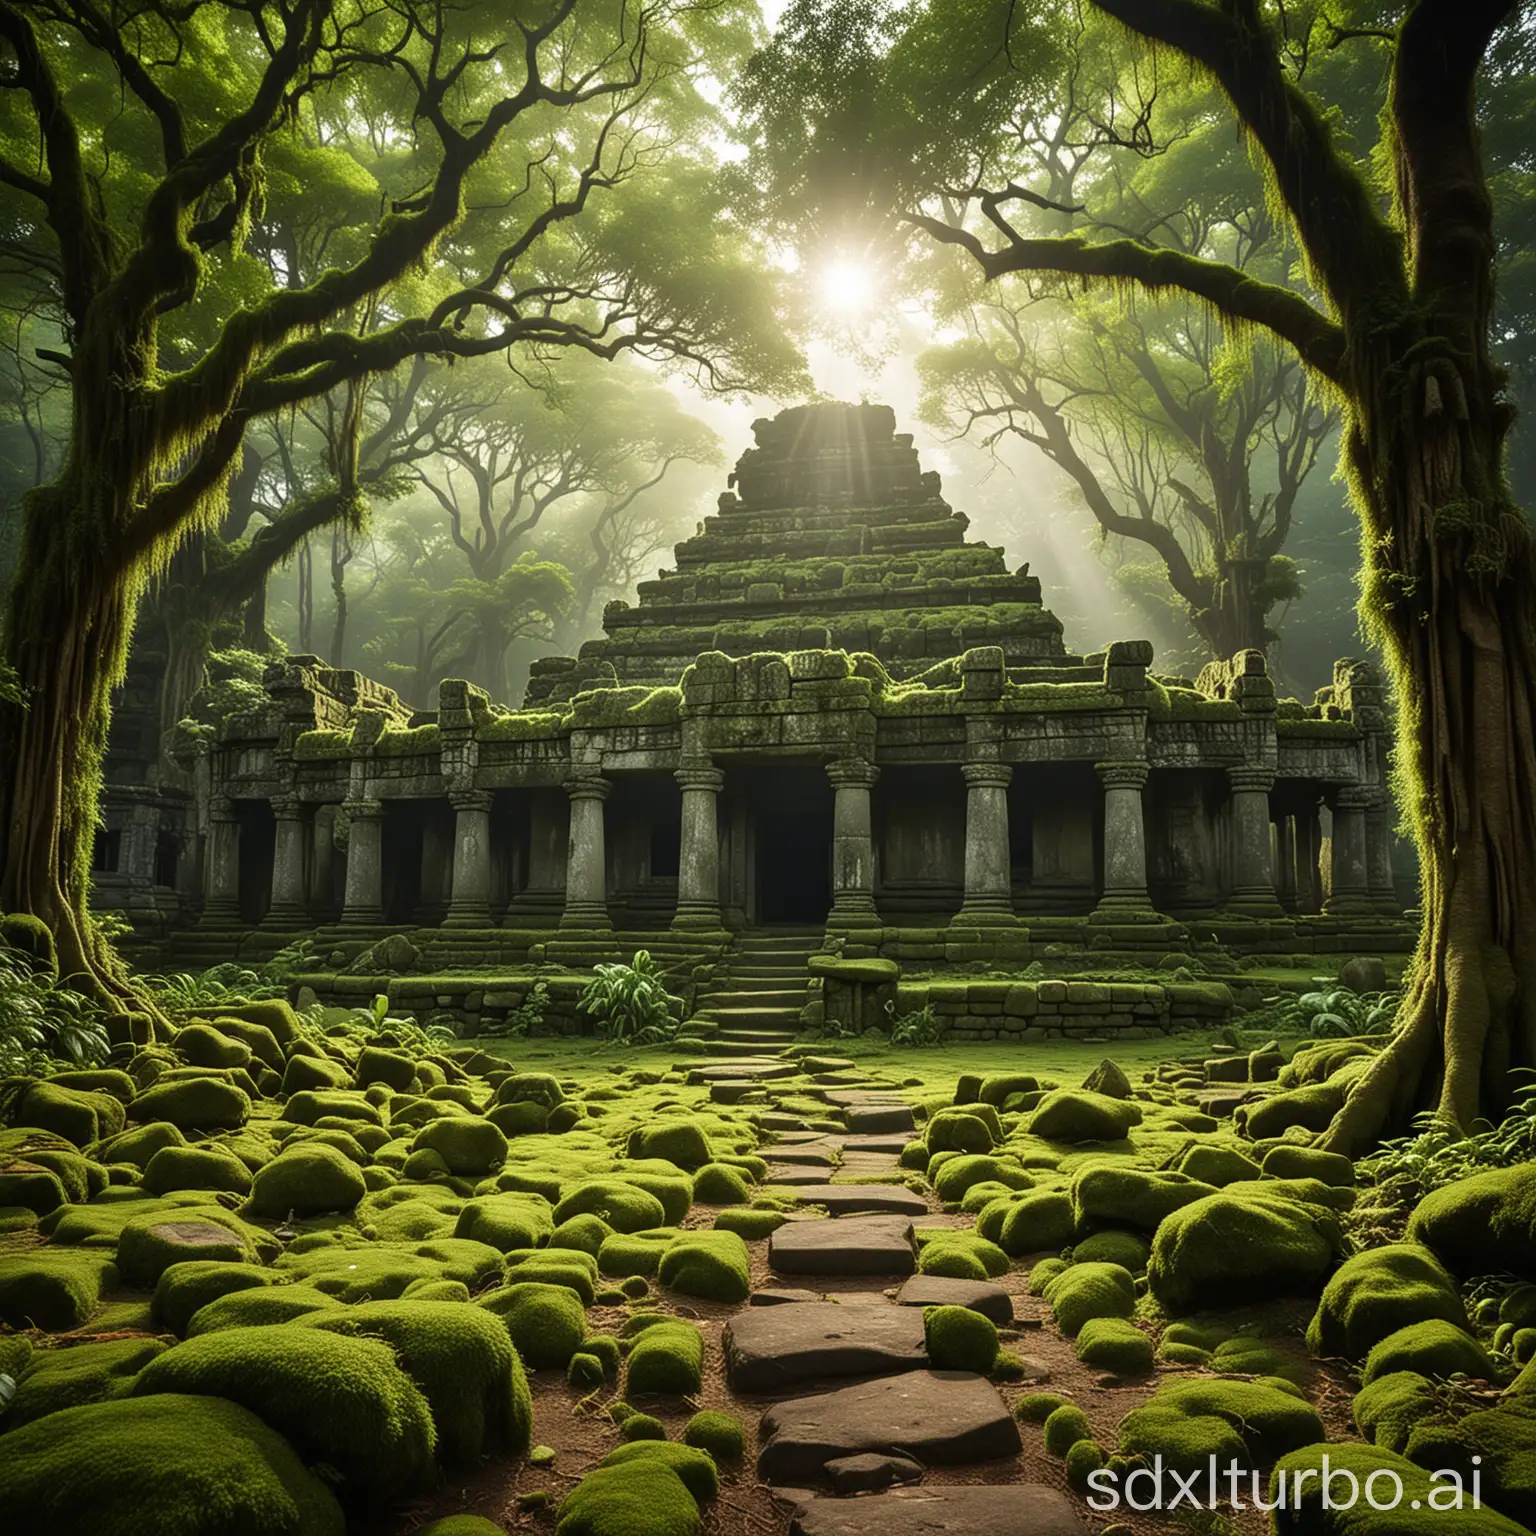 ancient temple ruins covered in vibrant green moss and foliage with shafts of light cutting through